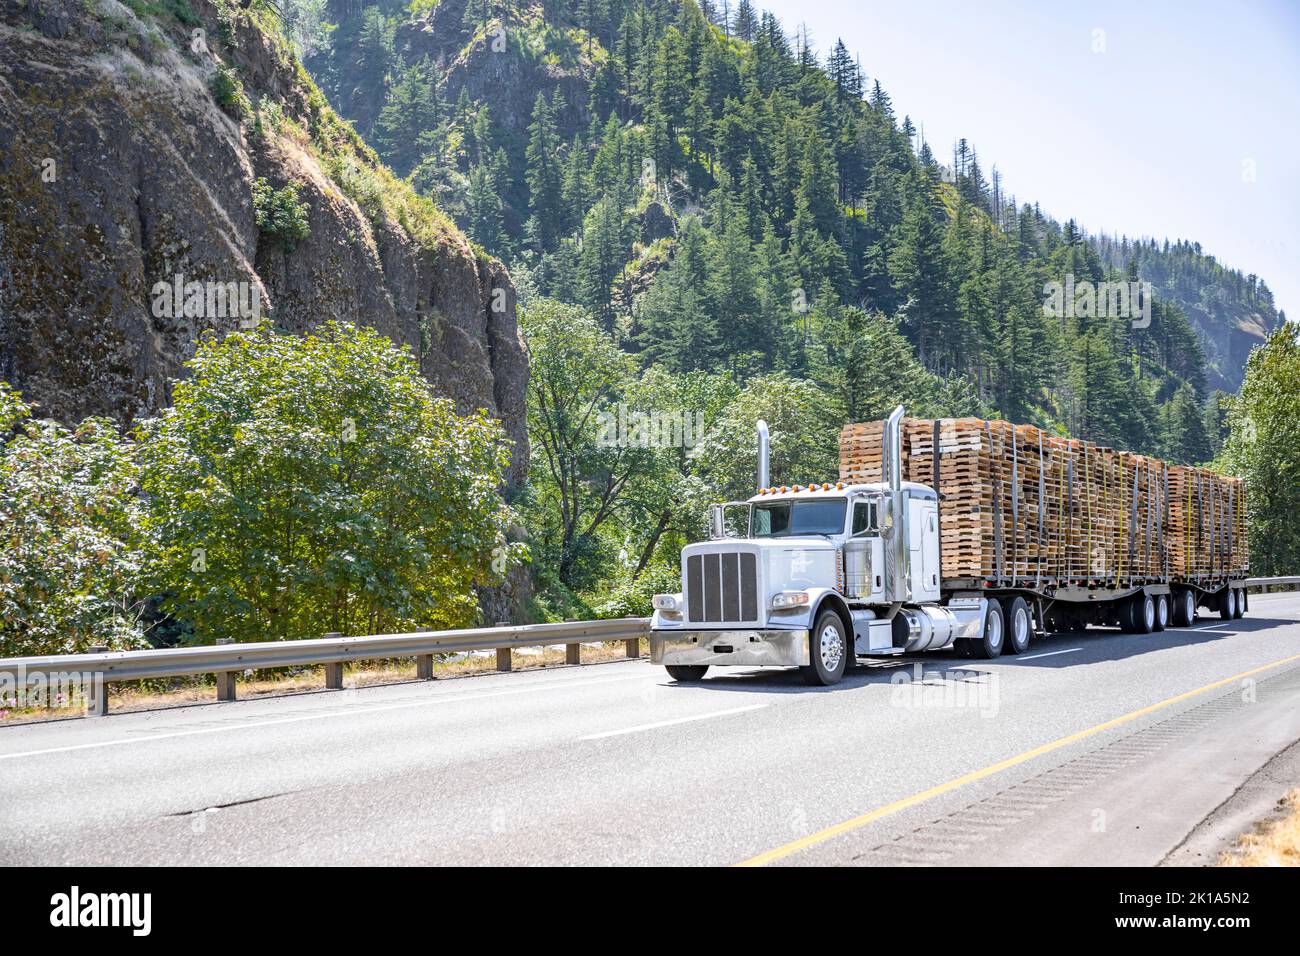 Classic style white big rig semi truck tractor with extended cab transporting fastened wood pallets on flat bed semi trailers running on the wide divi Stock Photo